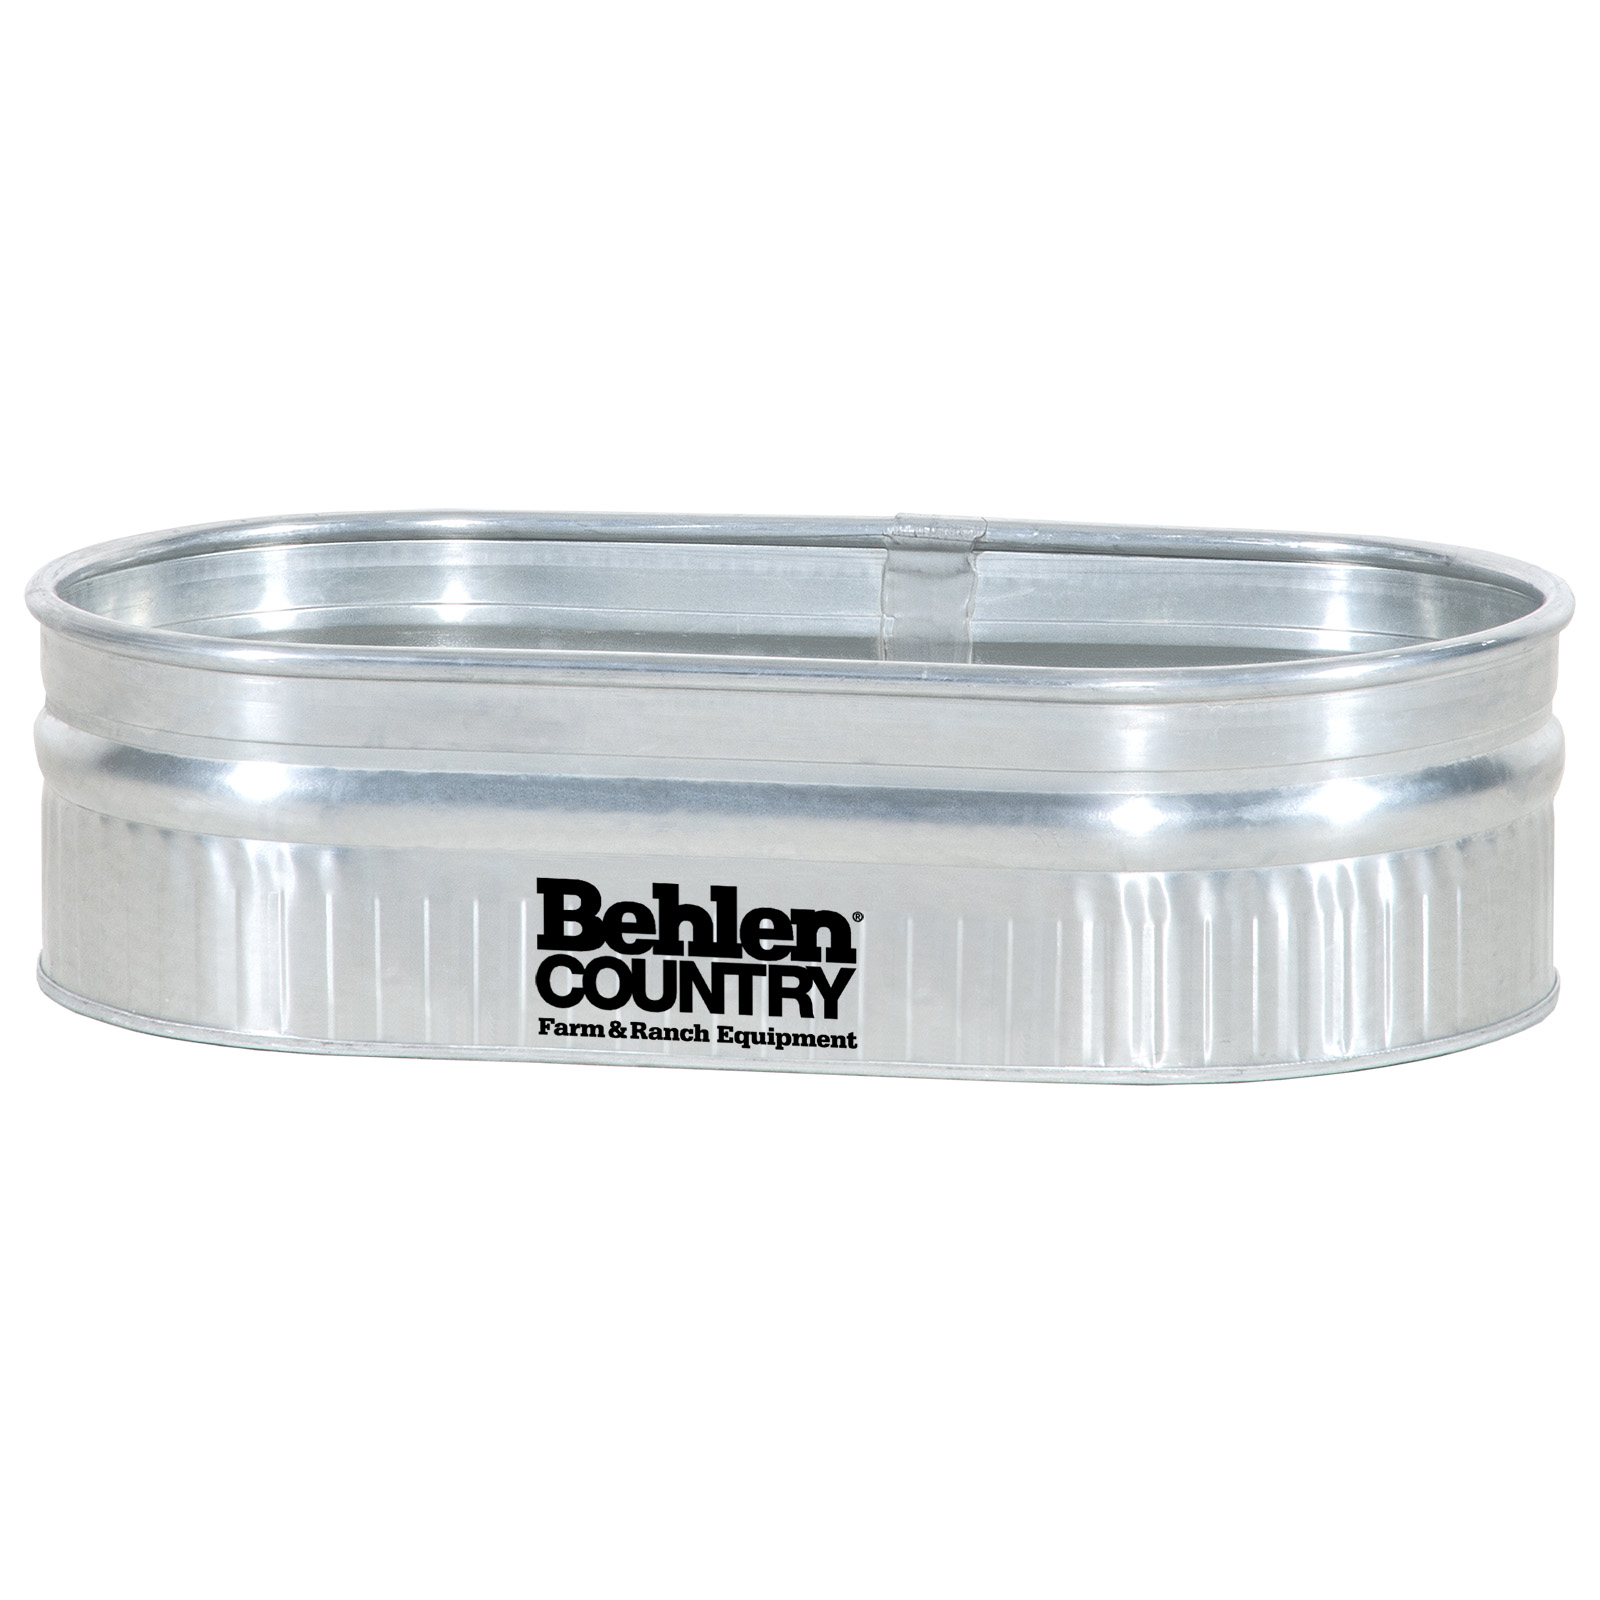 Behlen Country Galvanized Stock Tank Round End Approximately 140 Gallon 